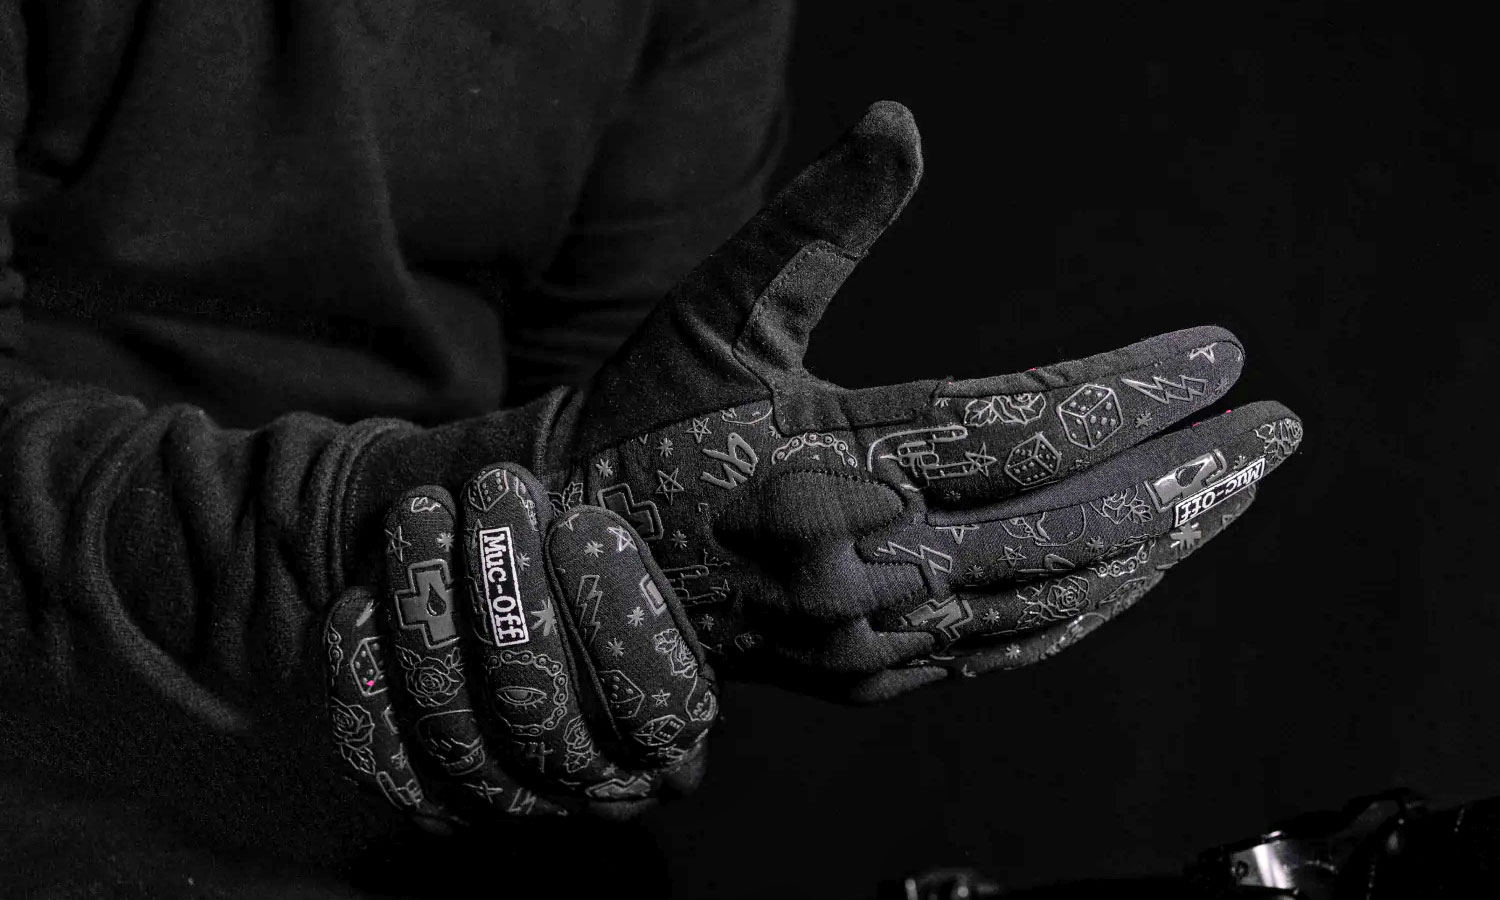 Muc-Off D3O Rider Gloves deliver impact protection for aggressive mountain biking, up close